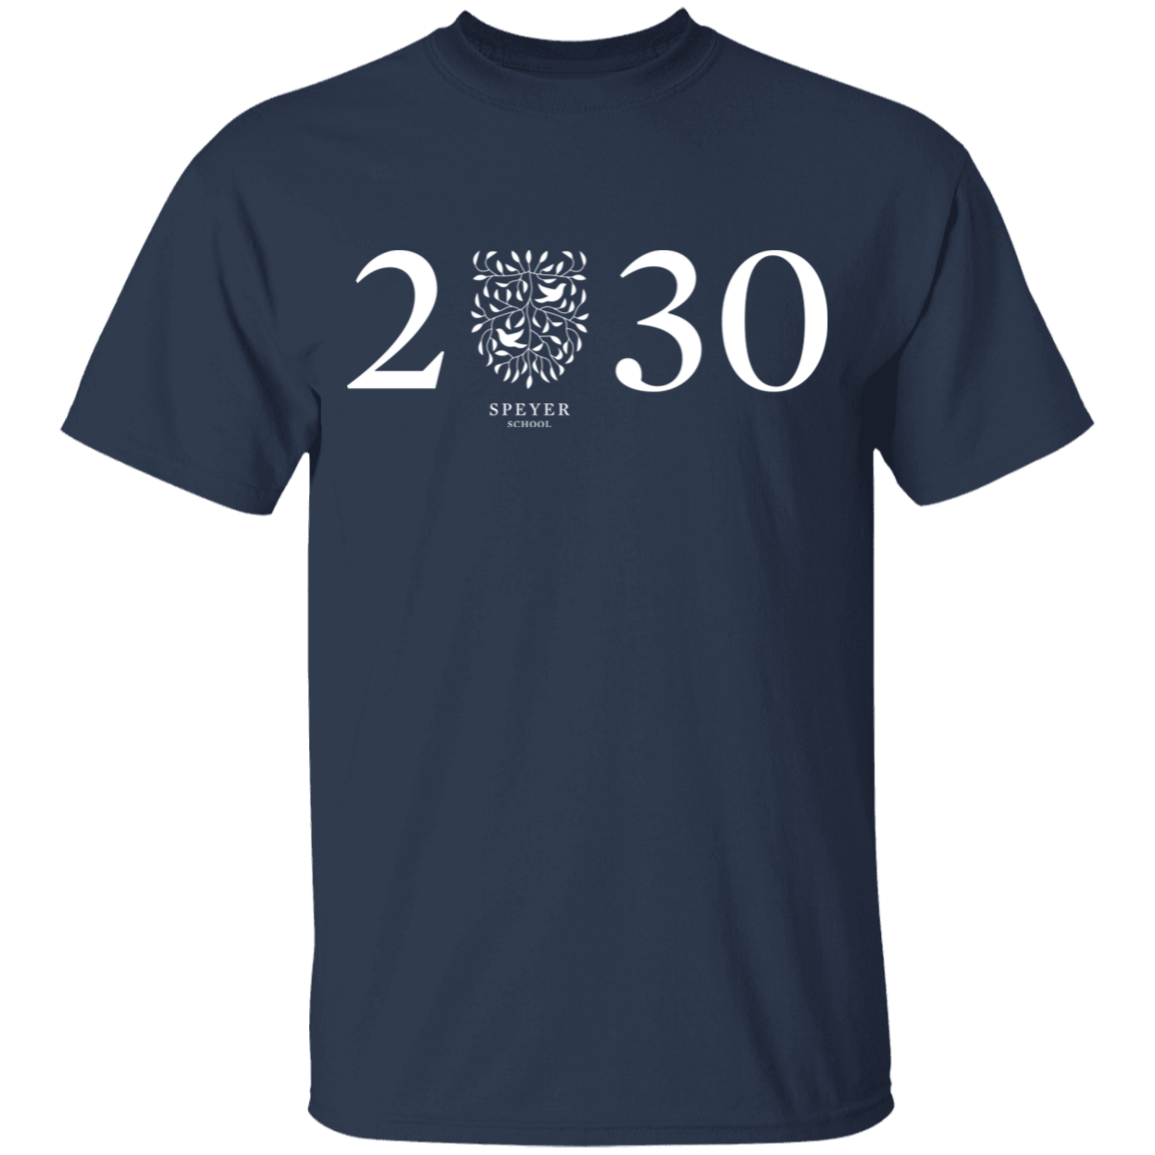 Class of 2030 T-Shirt, Youth Sizes